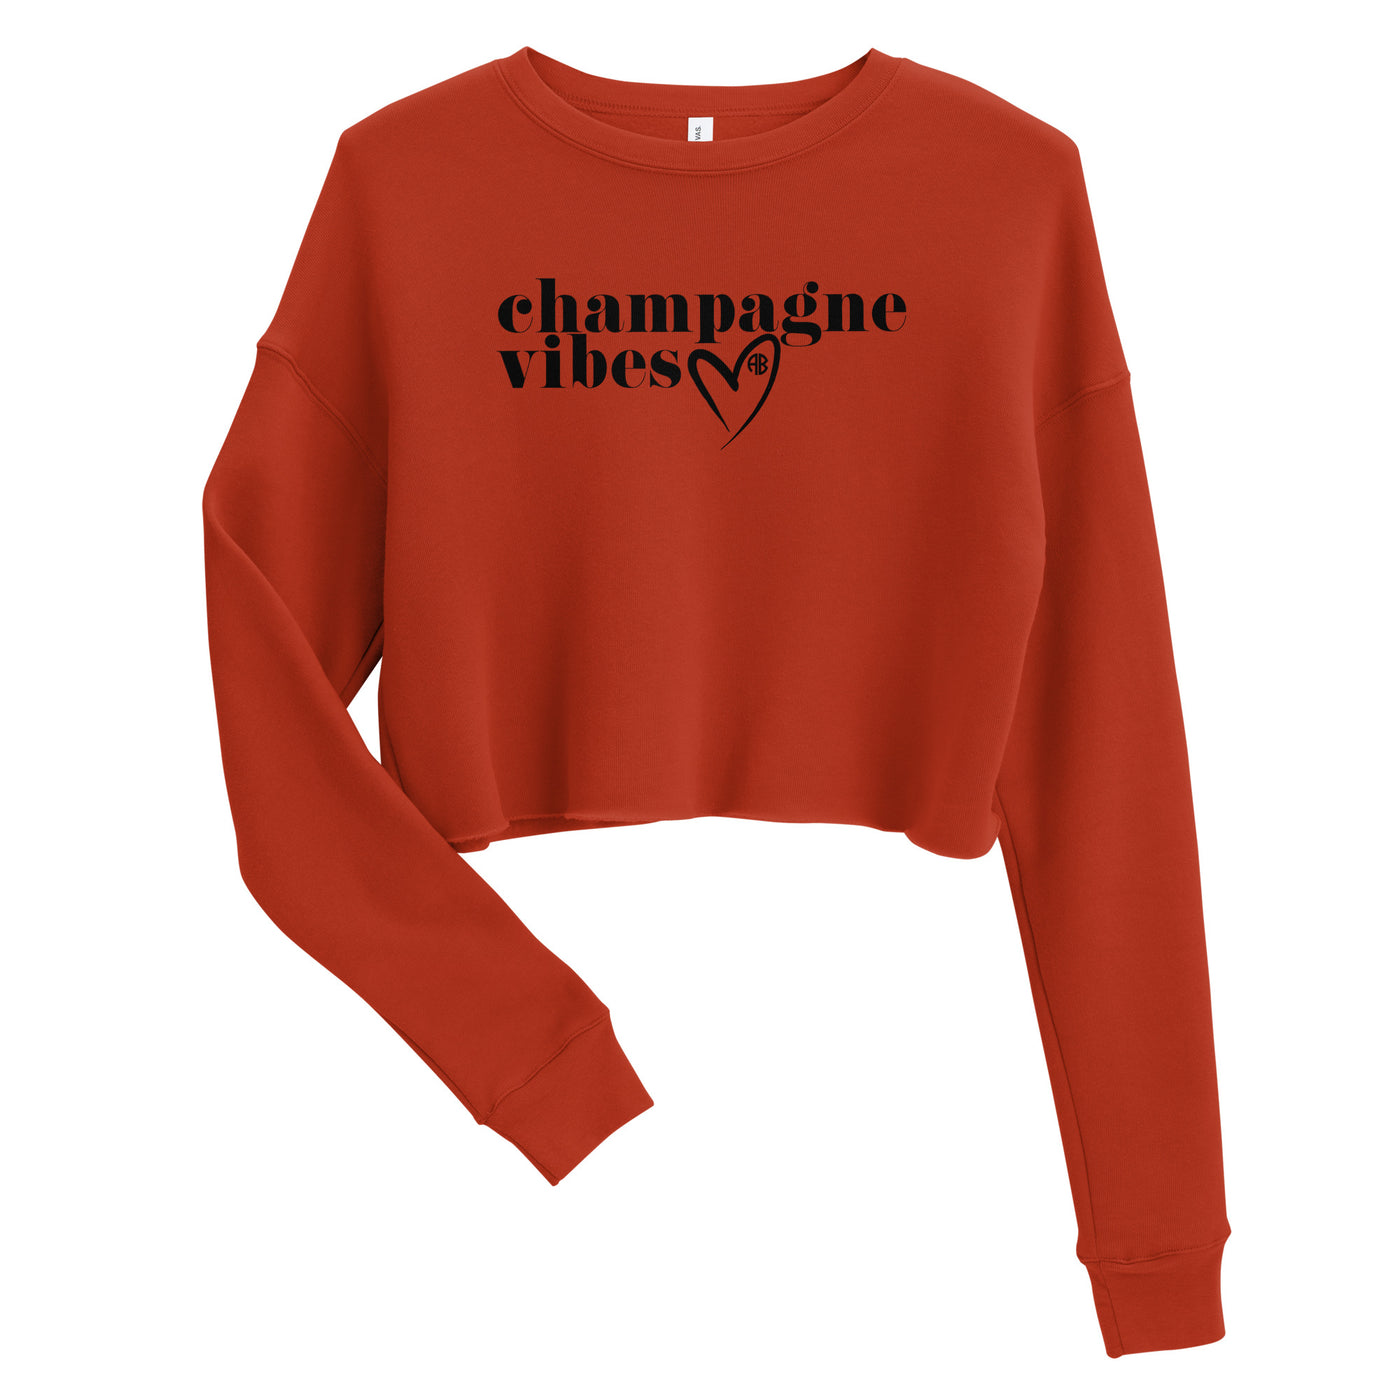 Initialed 'Champagne Vibes' Women's Cropped Sweatshirt